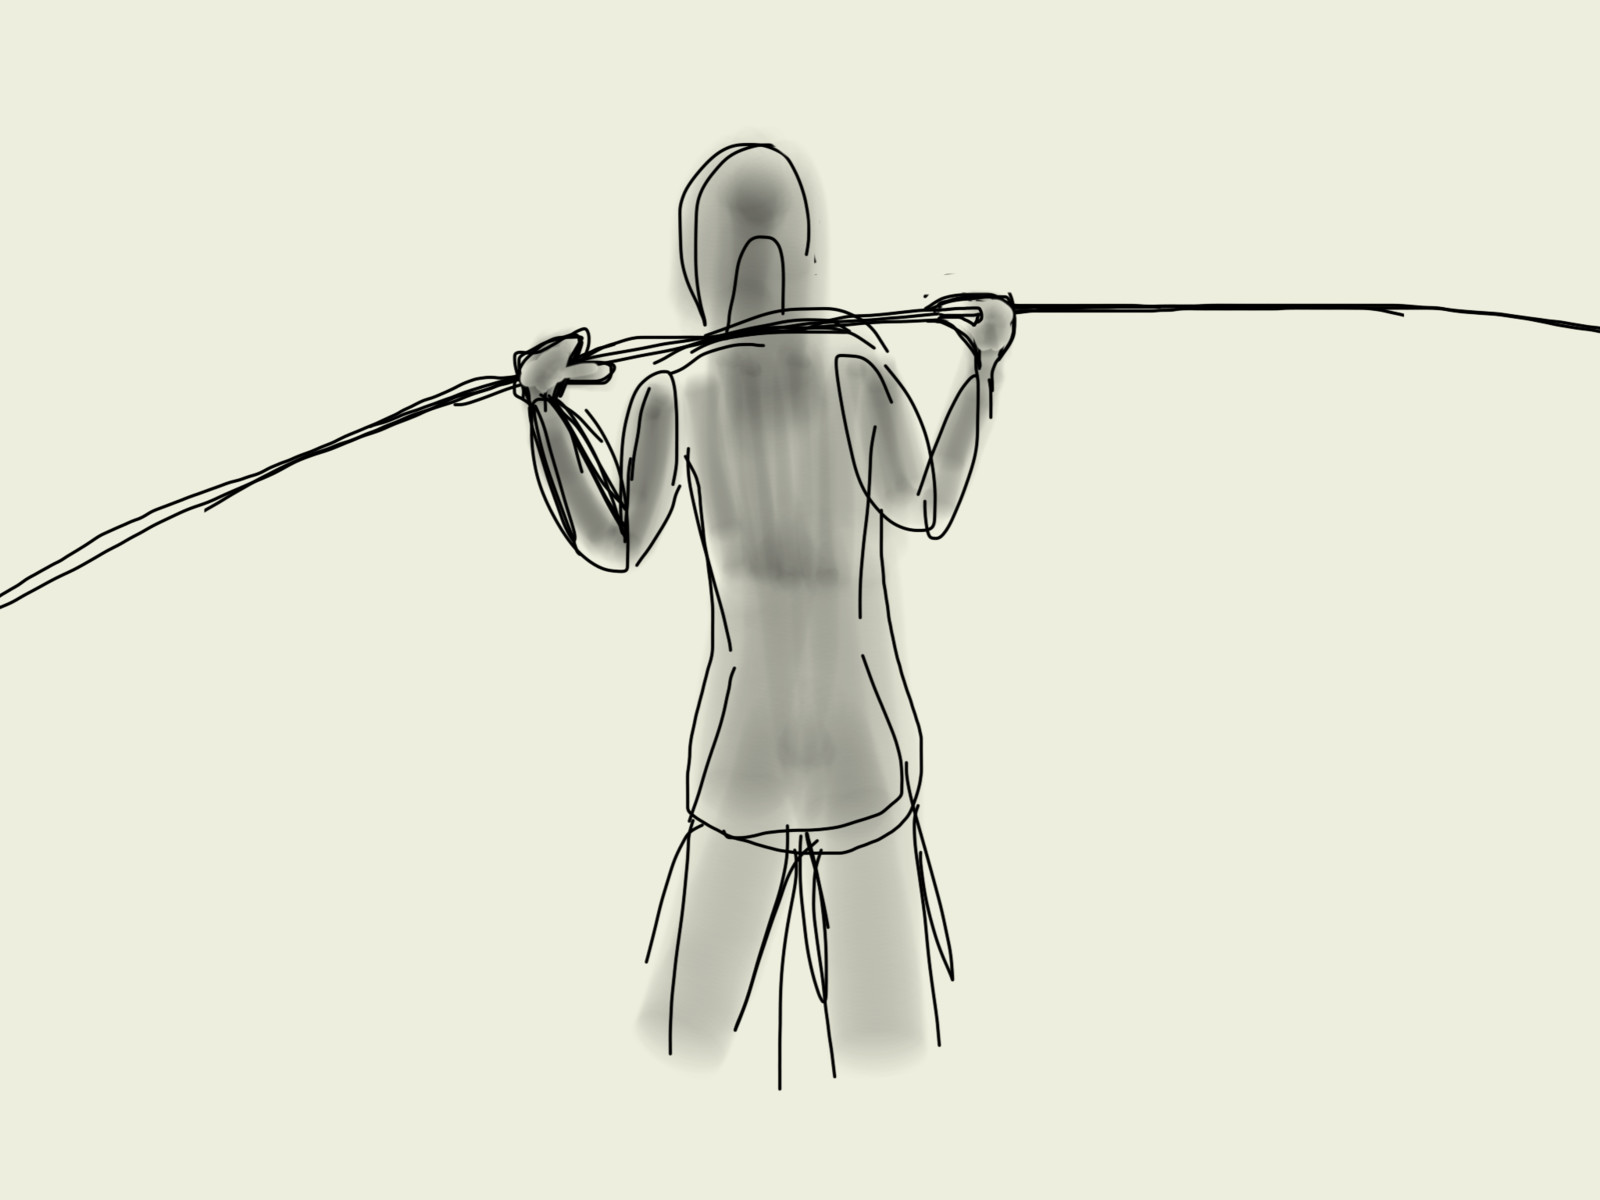 Rough pose study of the vaulter